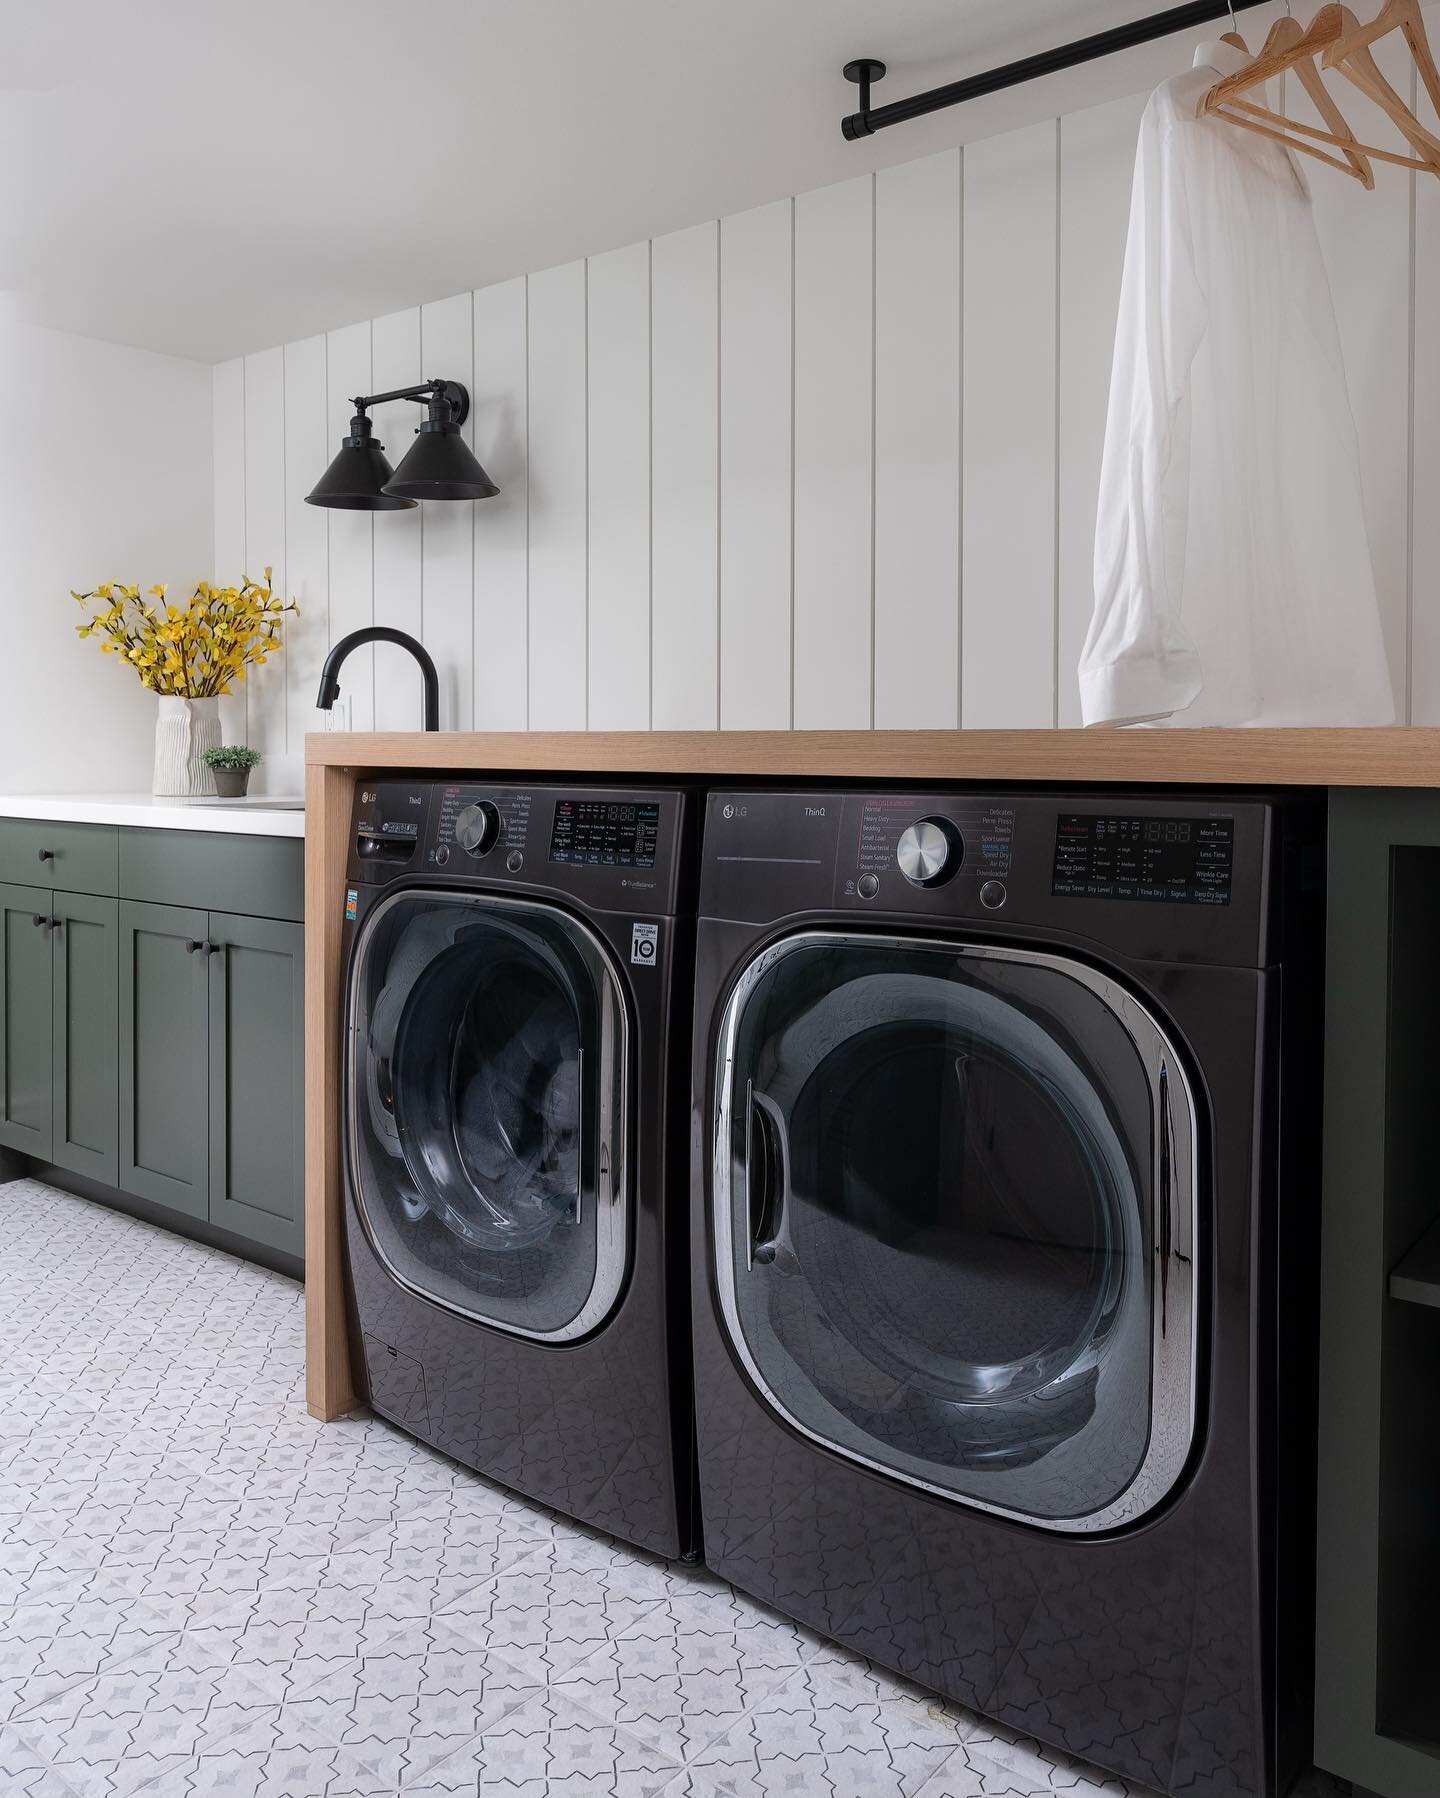 What was once concrete and stud walls (and a whole lot of plastic shelving), is now a sweet place to do laundry. Basement laundry can be pretty too. 

Photo: Dan Molina @danmolinastudio 

#hometohaven #gairdnerdesign #howihaven #farmhousedesign #farm